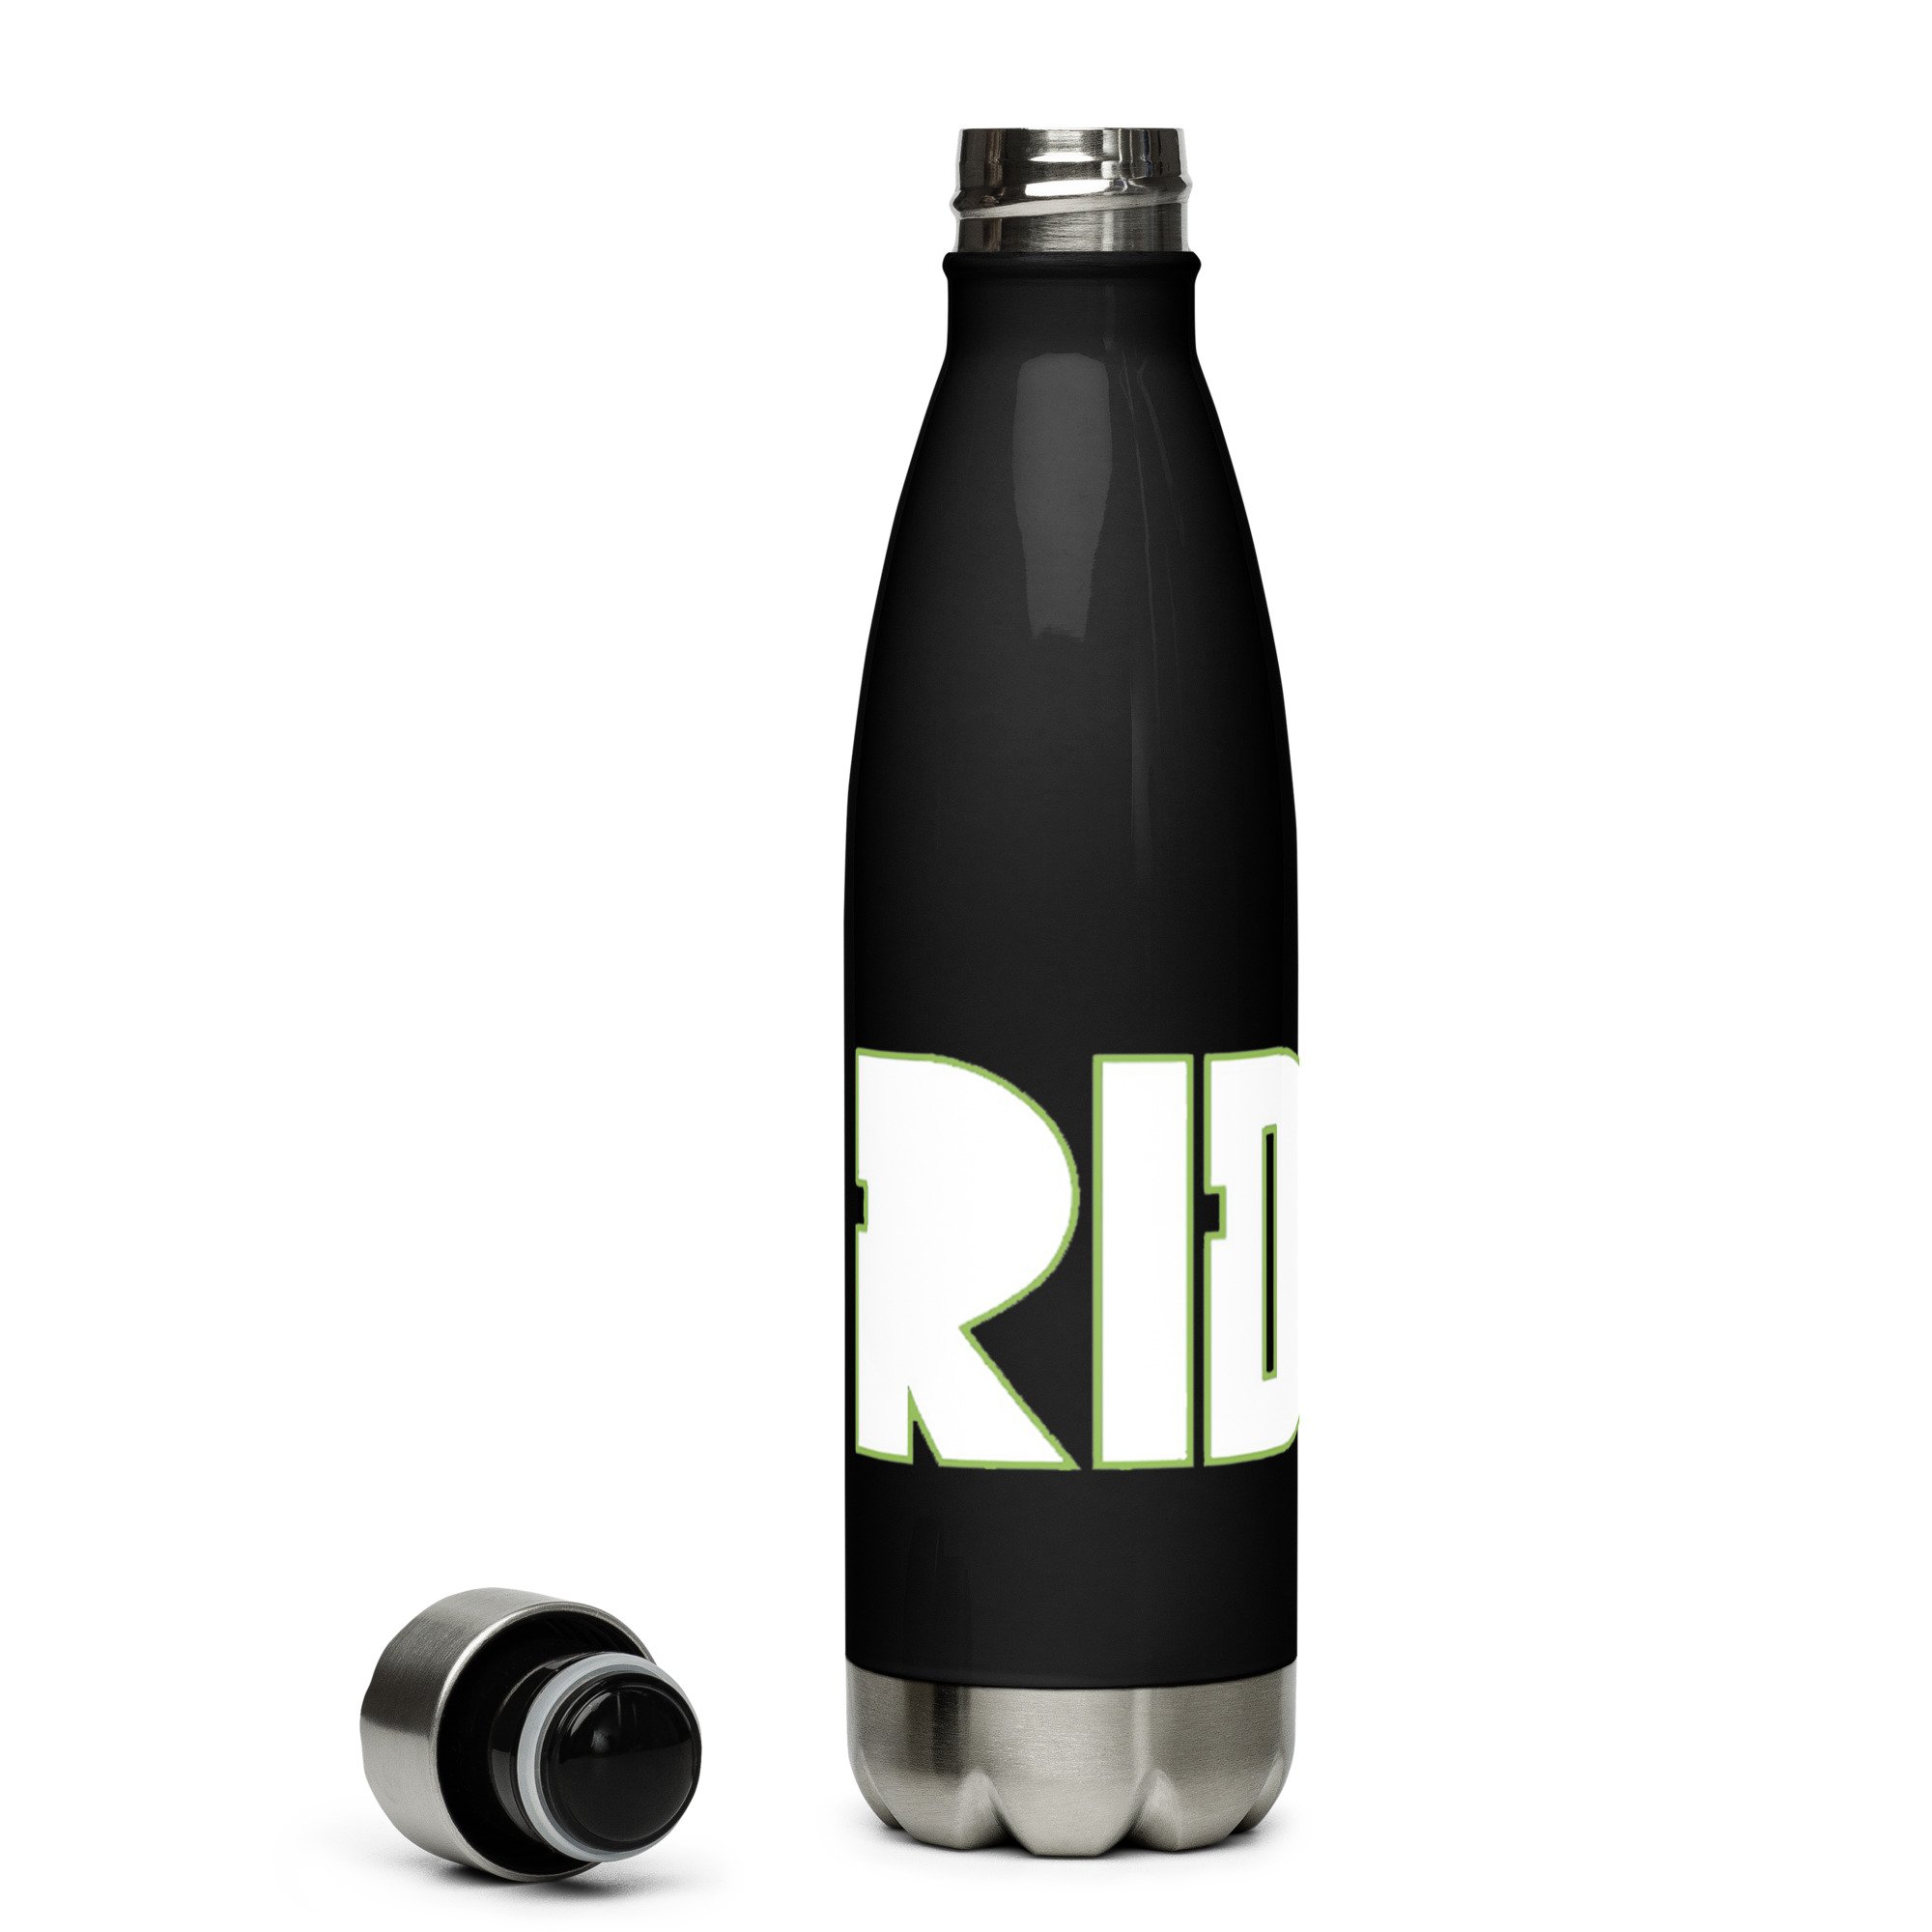 stainless-steel-water-bottle-black-17oz-right-6454a054bcc99.jpg